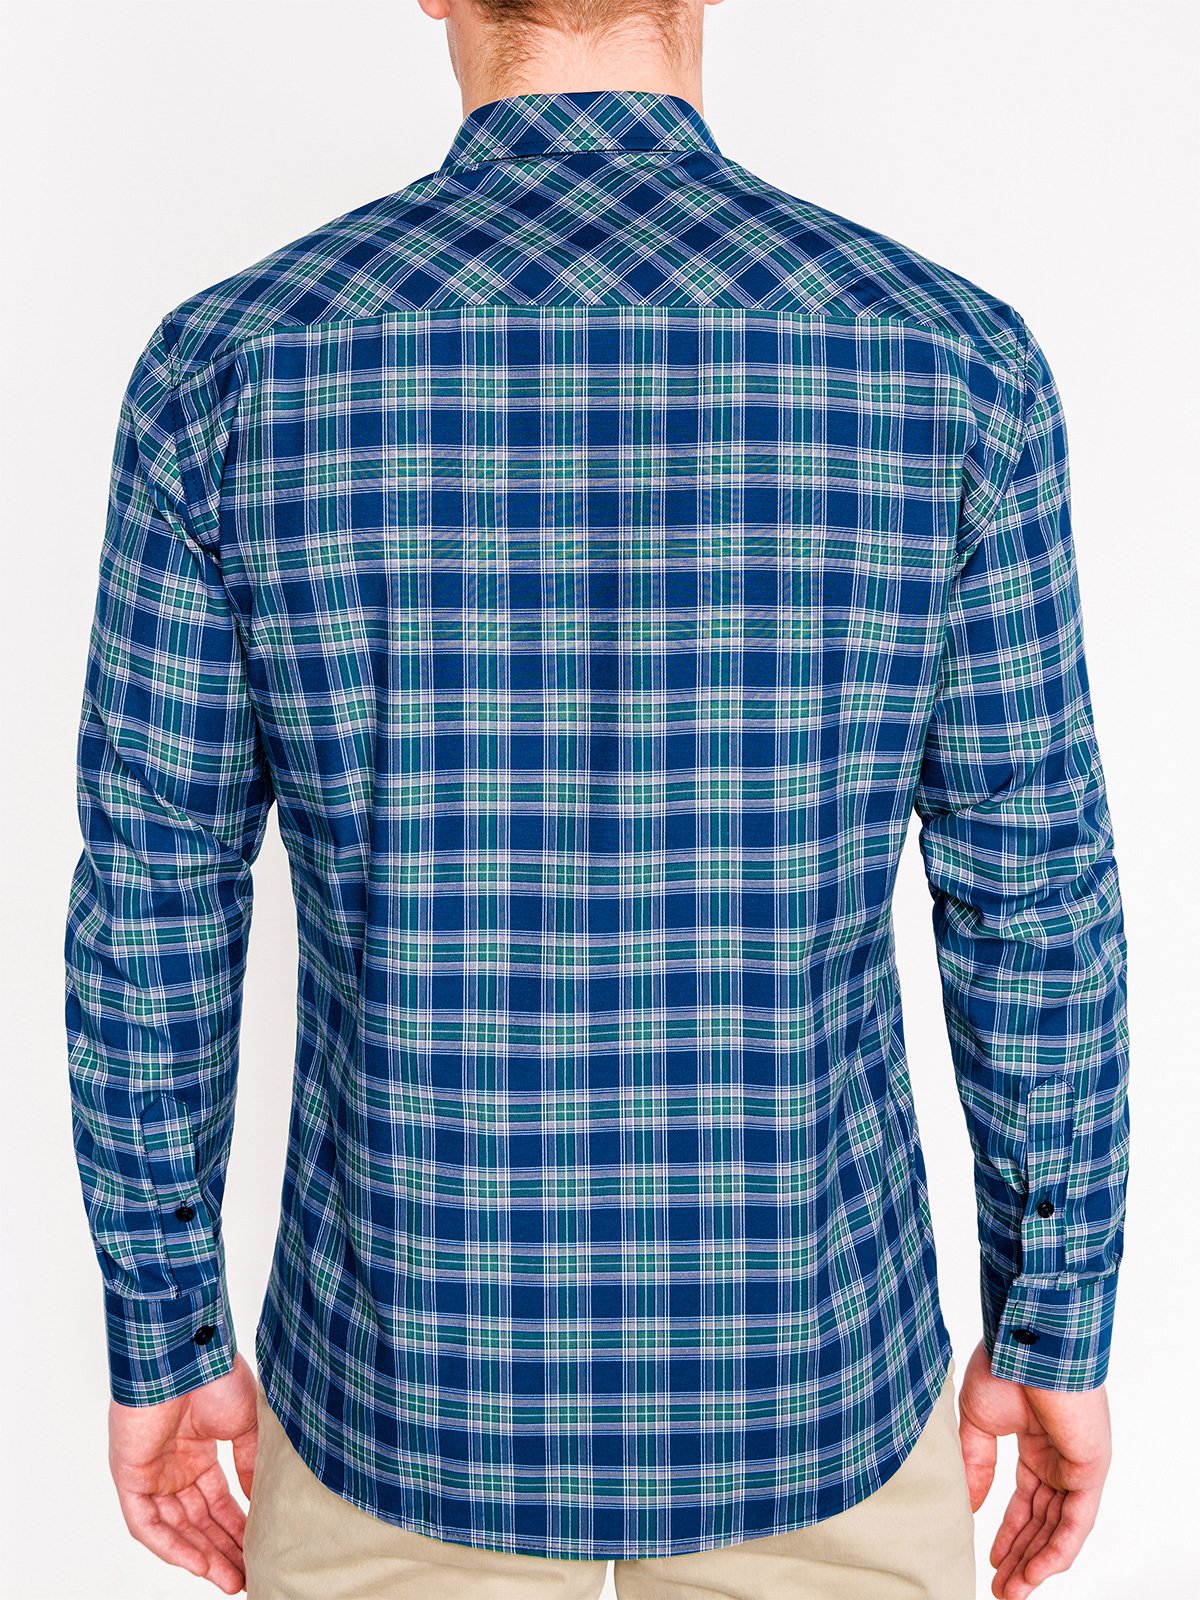 Men's check shirt with long sleeves K418 - navy/green | MODONE ...